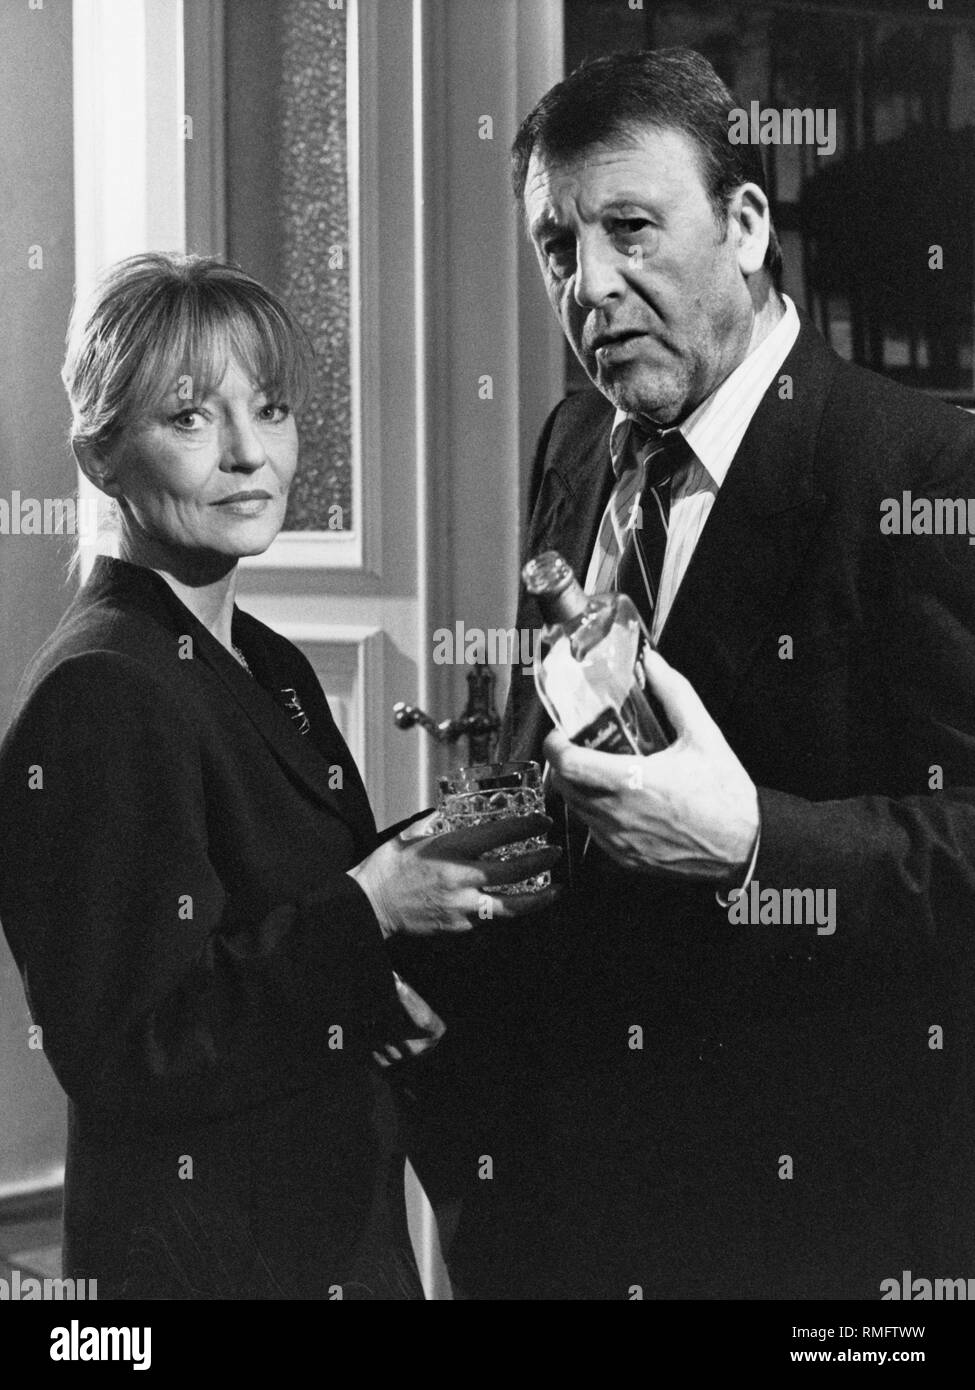 Guenter Lamprecht (right) as commissioner in the TV crime series Tatort, here together with Karin Ball in the CRC crime scene 'Frolic at five'. Stock Photo